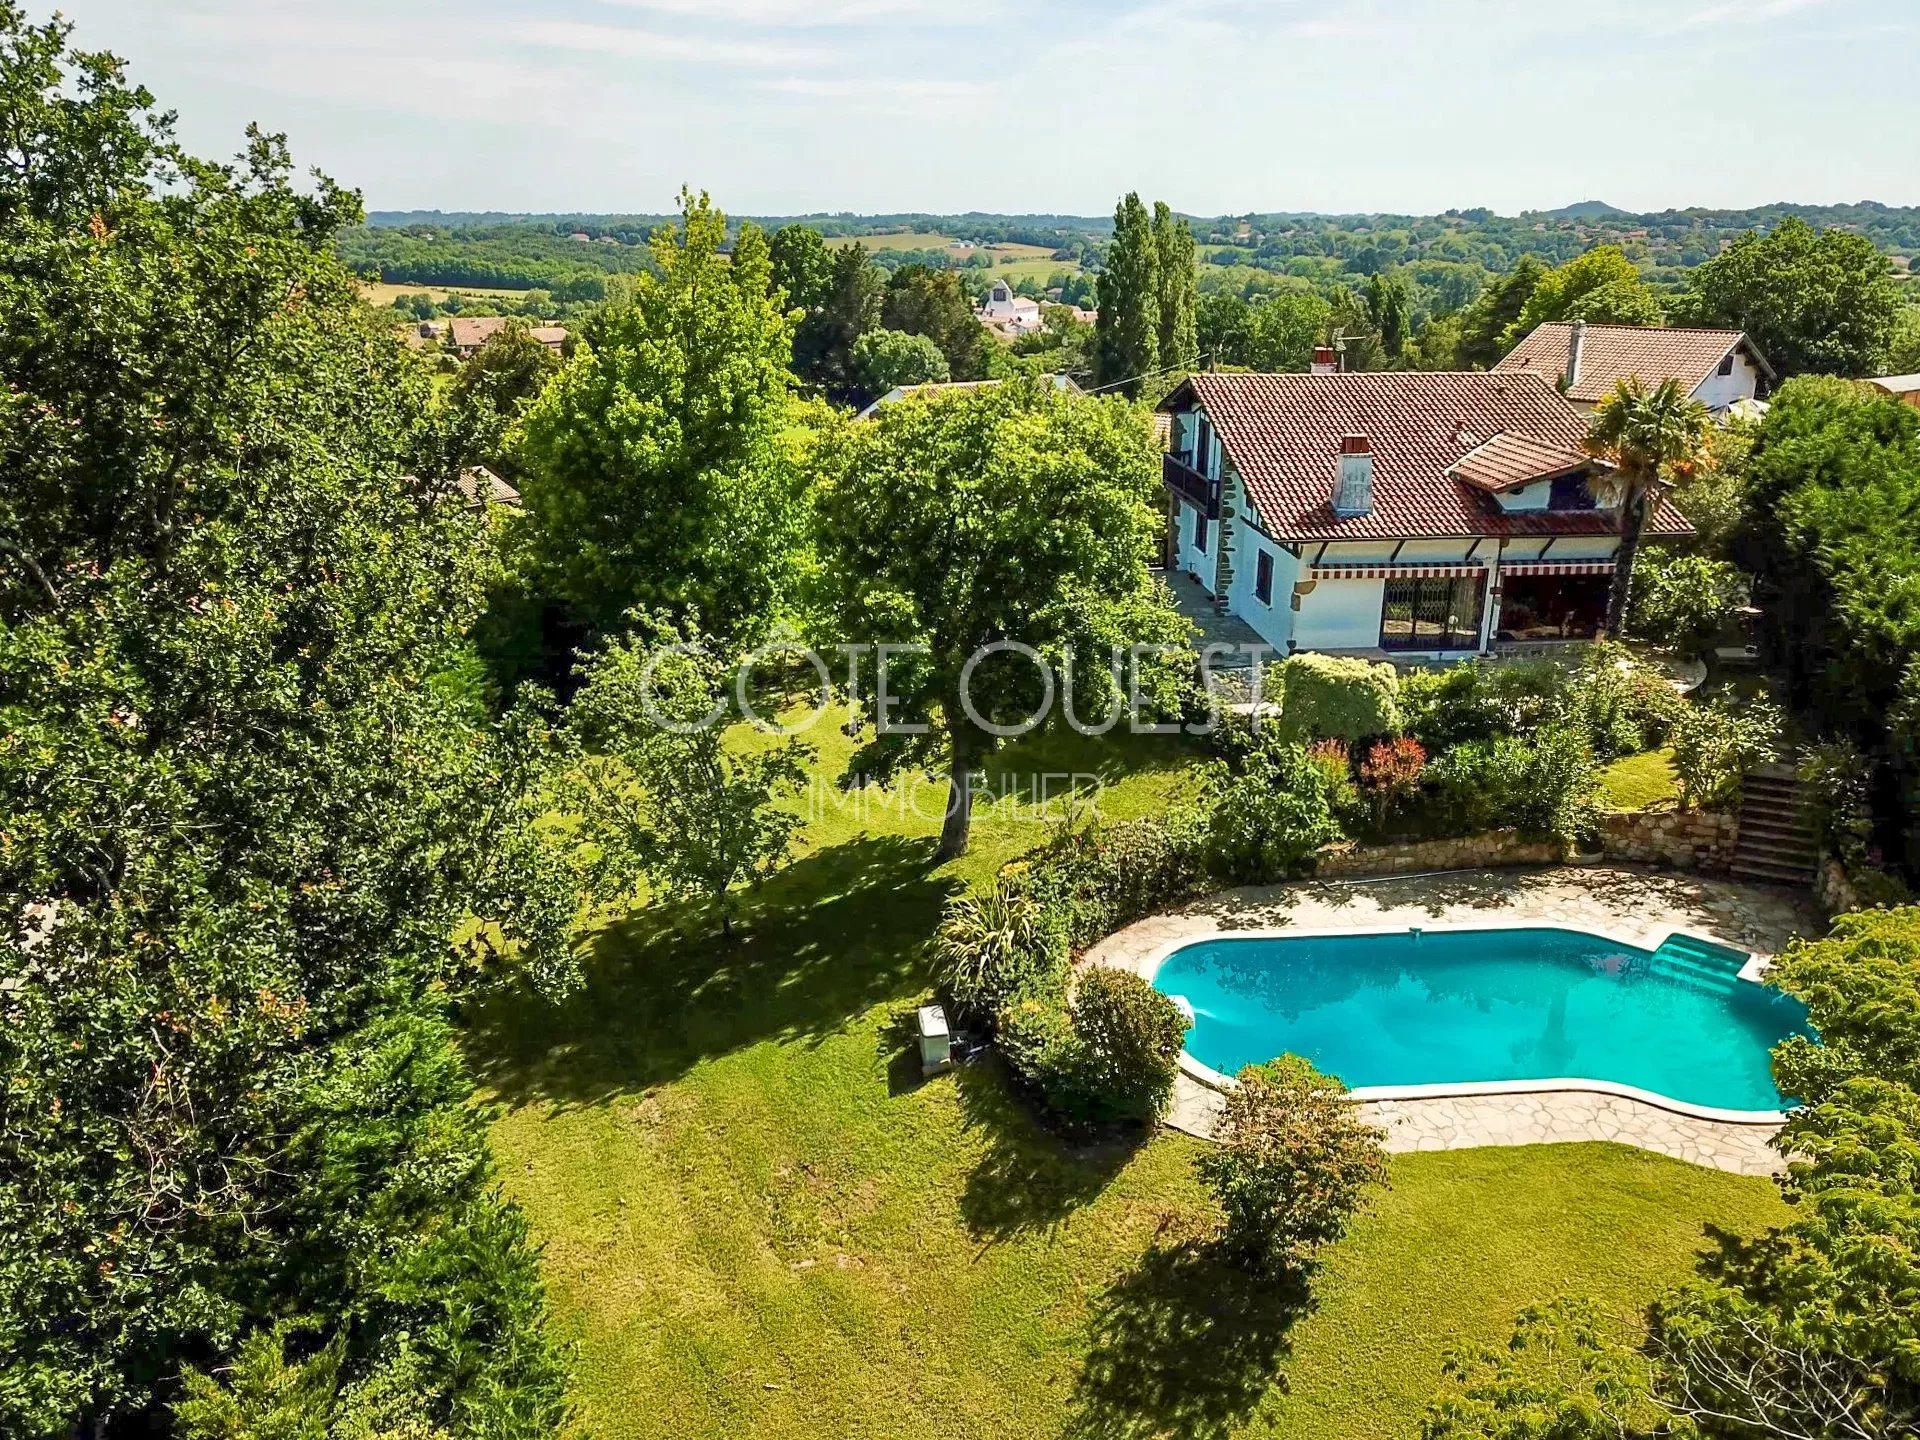 AHETZE – A 5-BED PROPERTY WITH A SWIMMING POOL